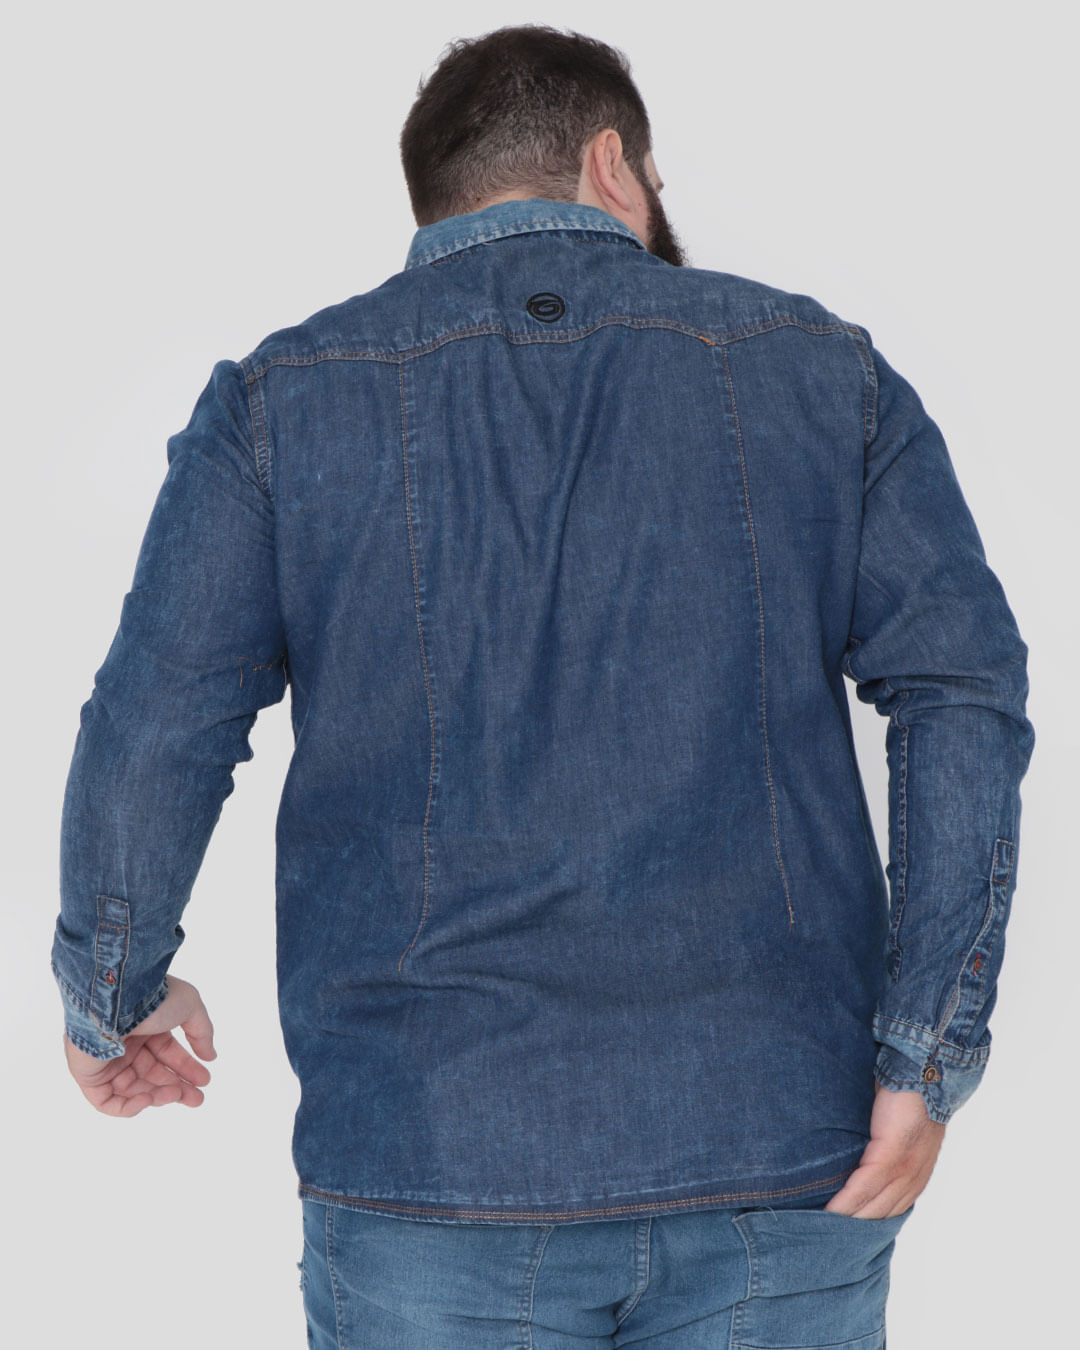 Camisa-Masculina-Plus-Size-Jeans-Gangster-Azul-